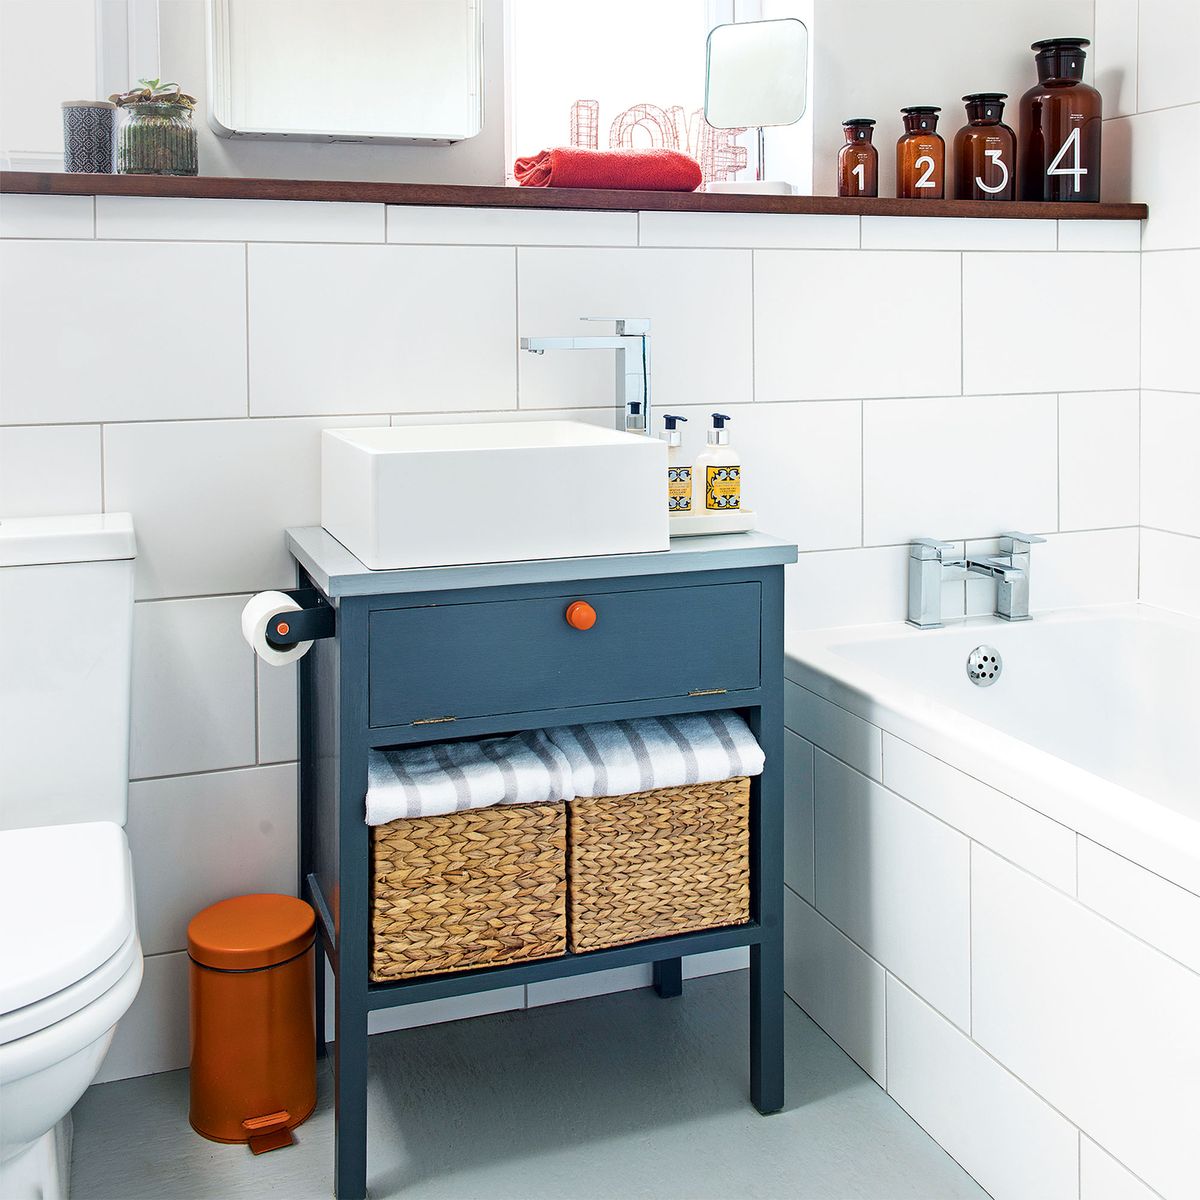 8 Clever IKEA Hacks That'll Make the Most of Your Tiny Bathroom